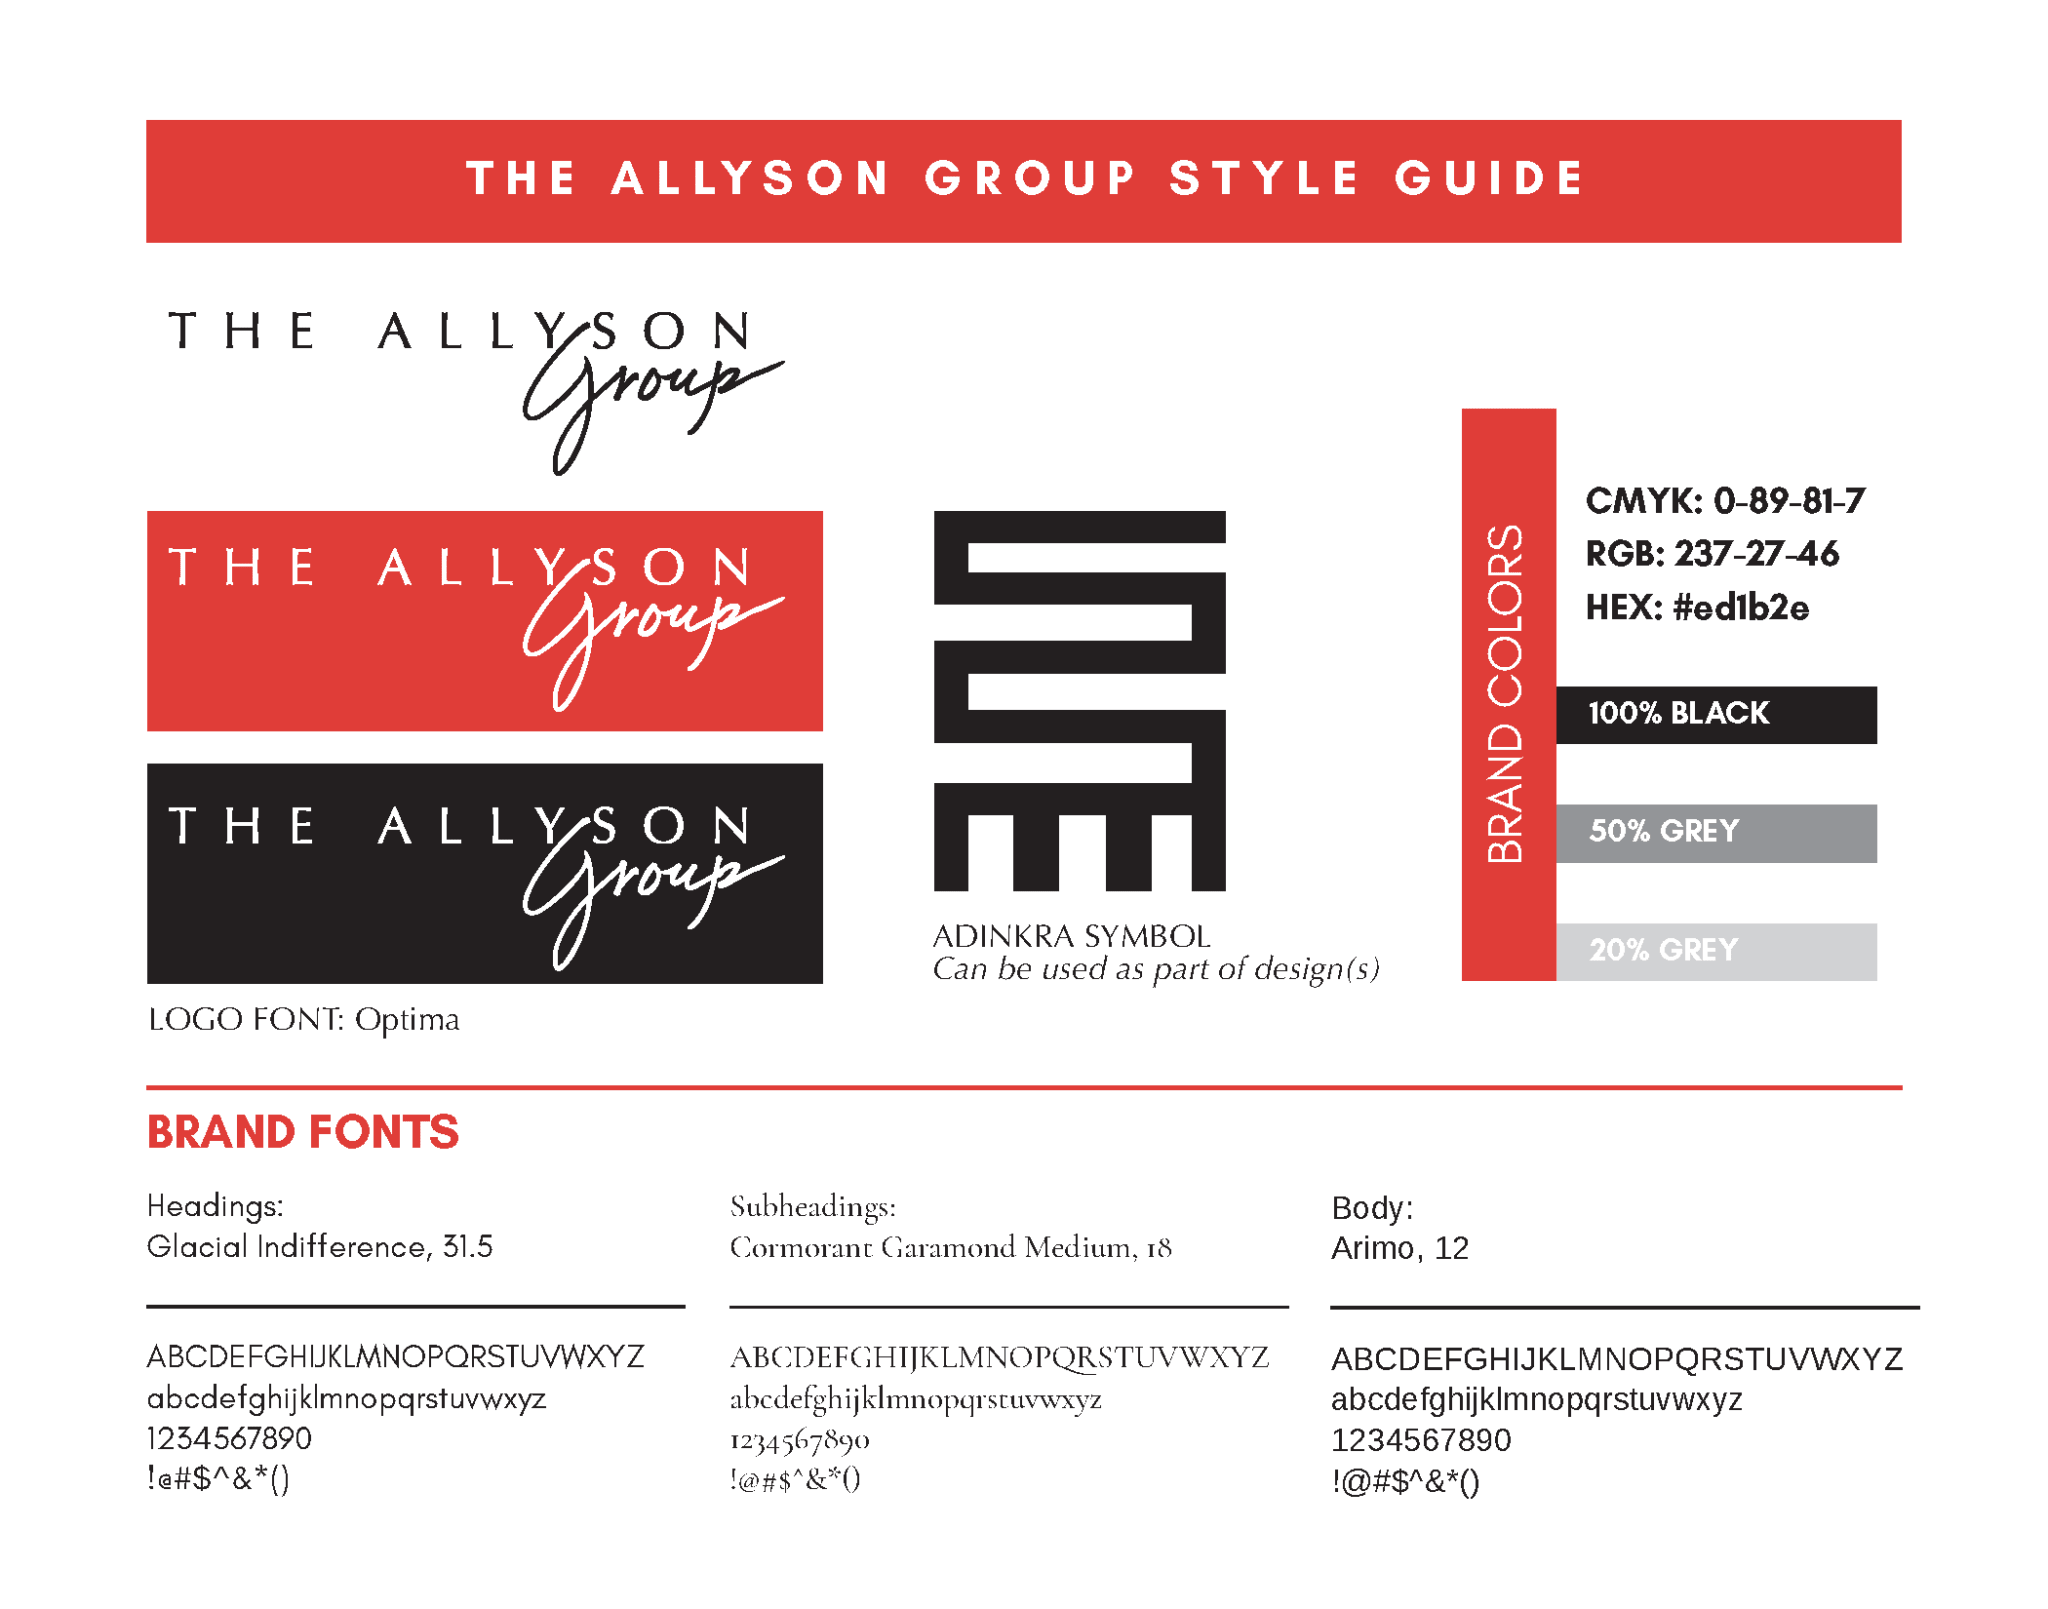 The Allyson Group Style Guide 2020